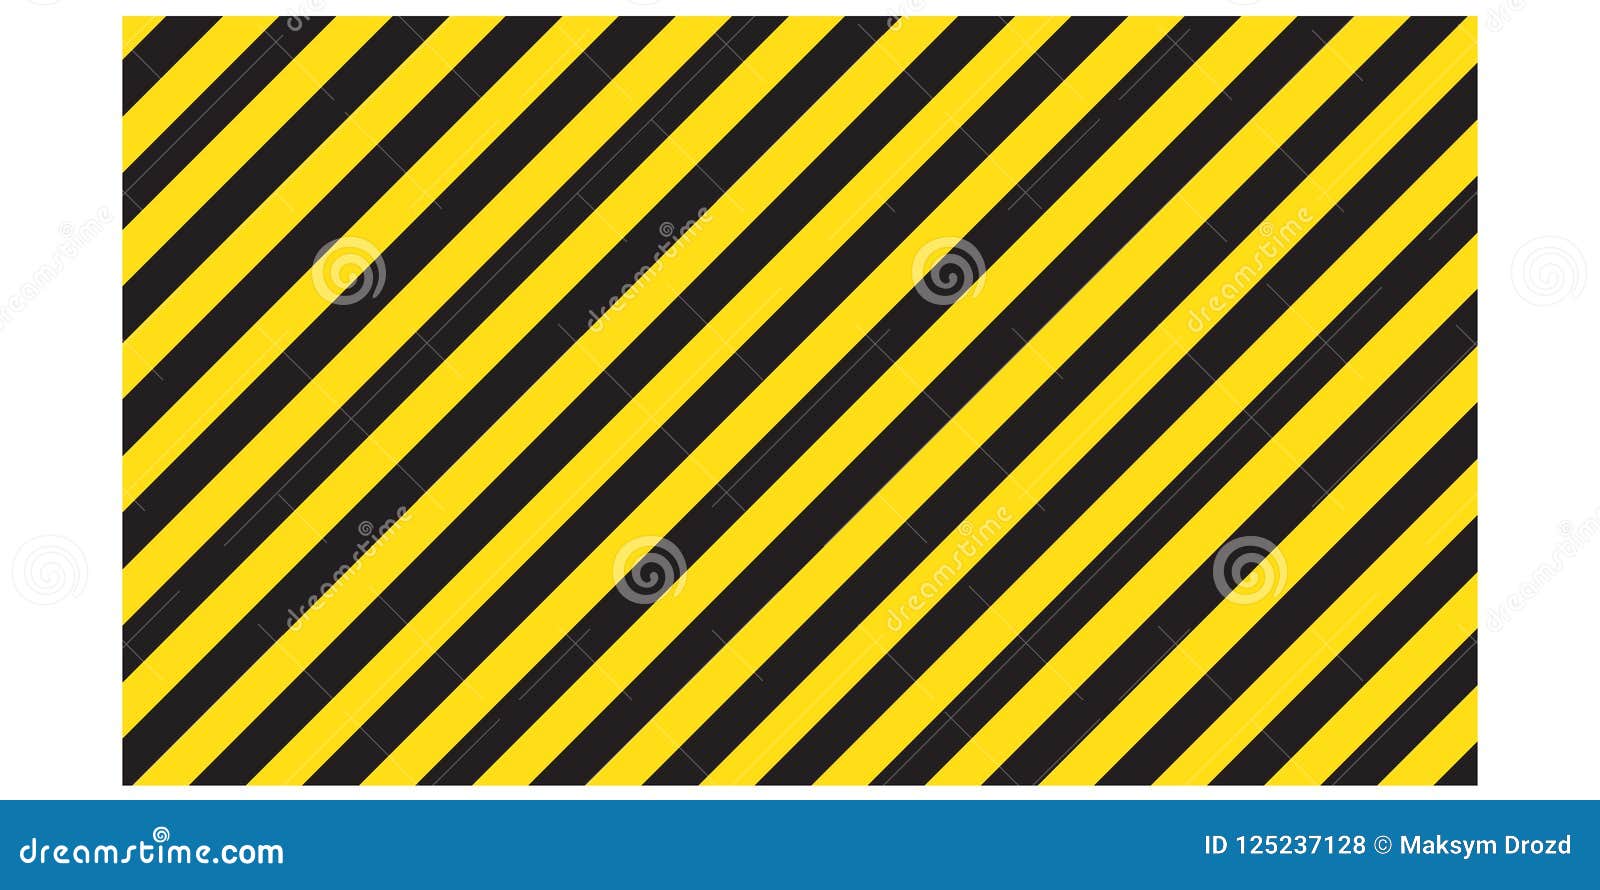 warning striped rectangular background, yellow and black stripes on the diagonal, a warning to be careful - the potential danger v